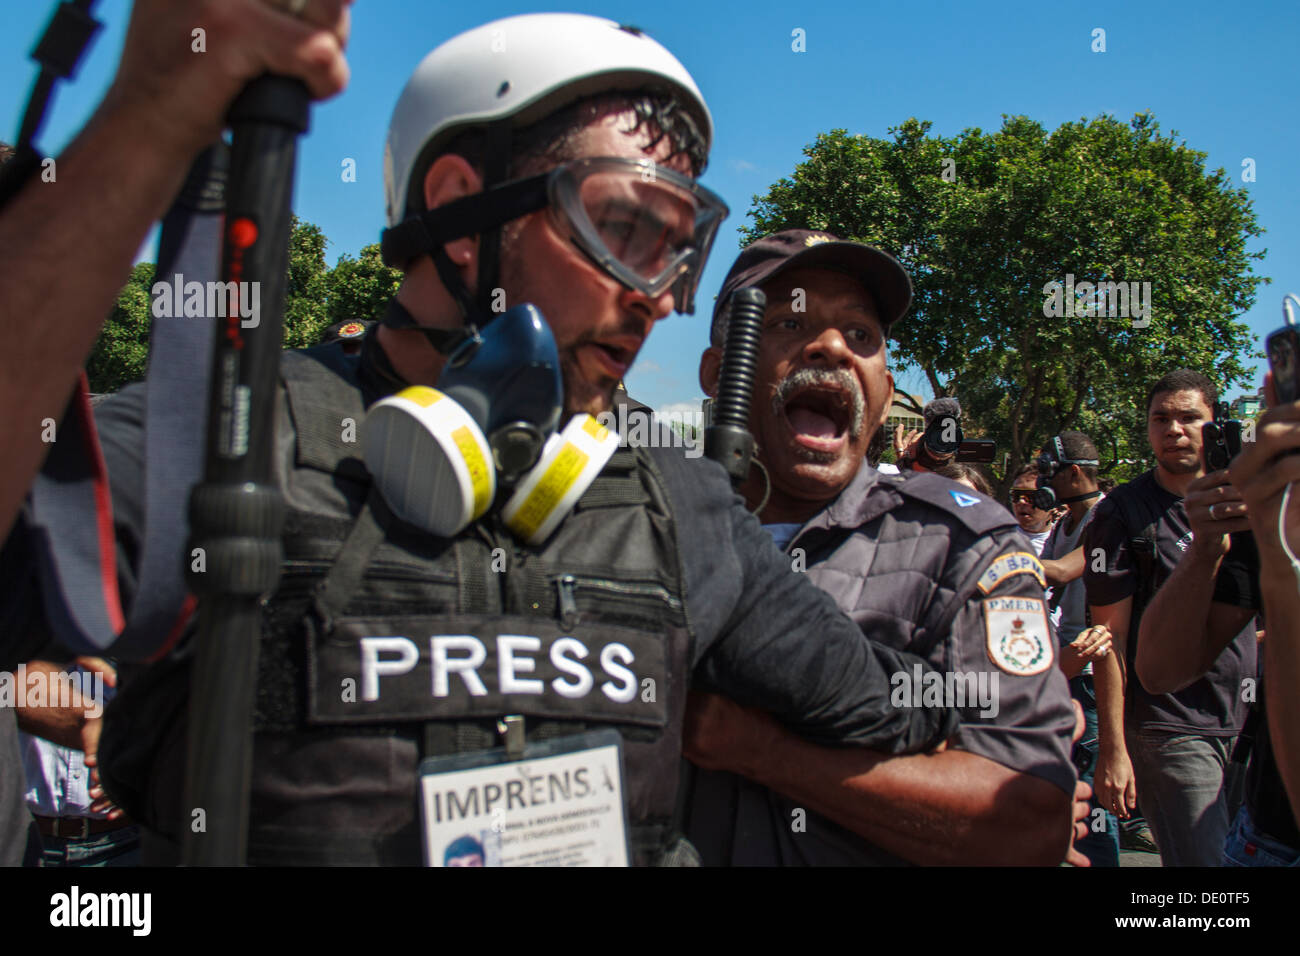 Independence of Brazil (September 7). Military Police holds film reporter during protest in Rio de Janeiro Stock Photo